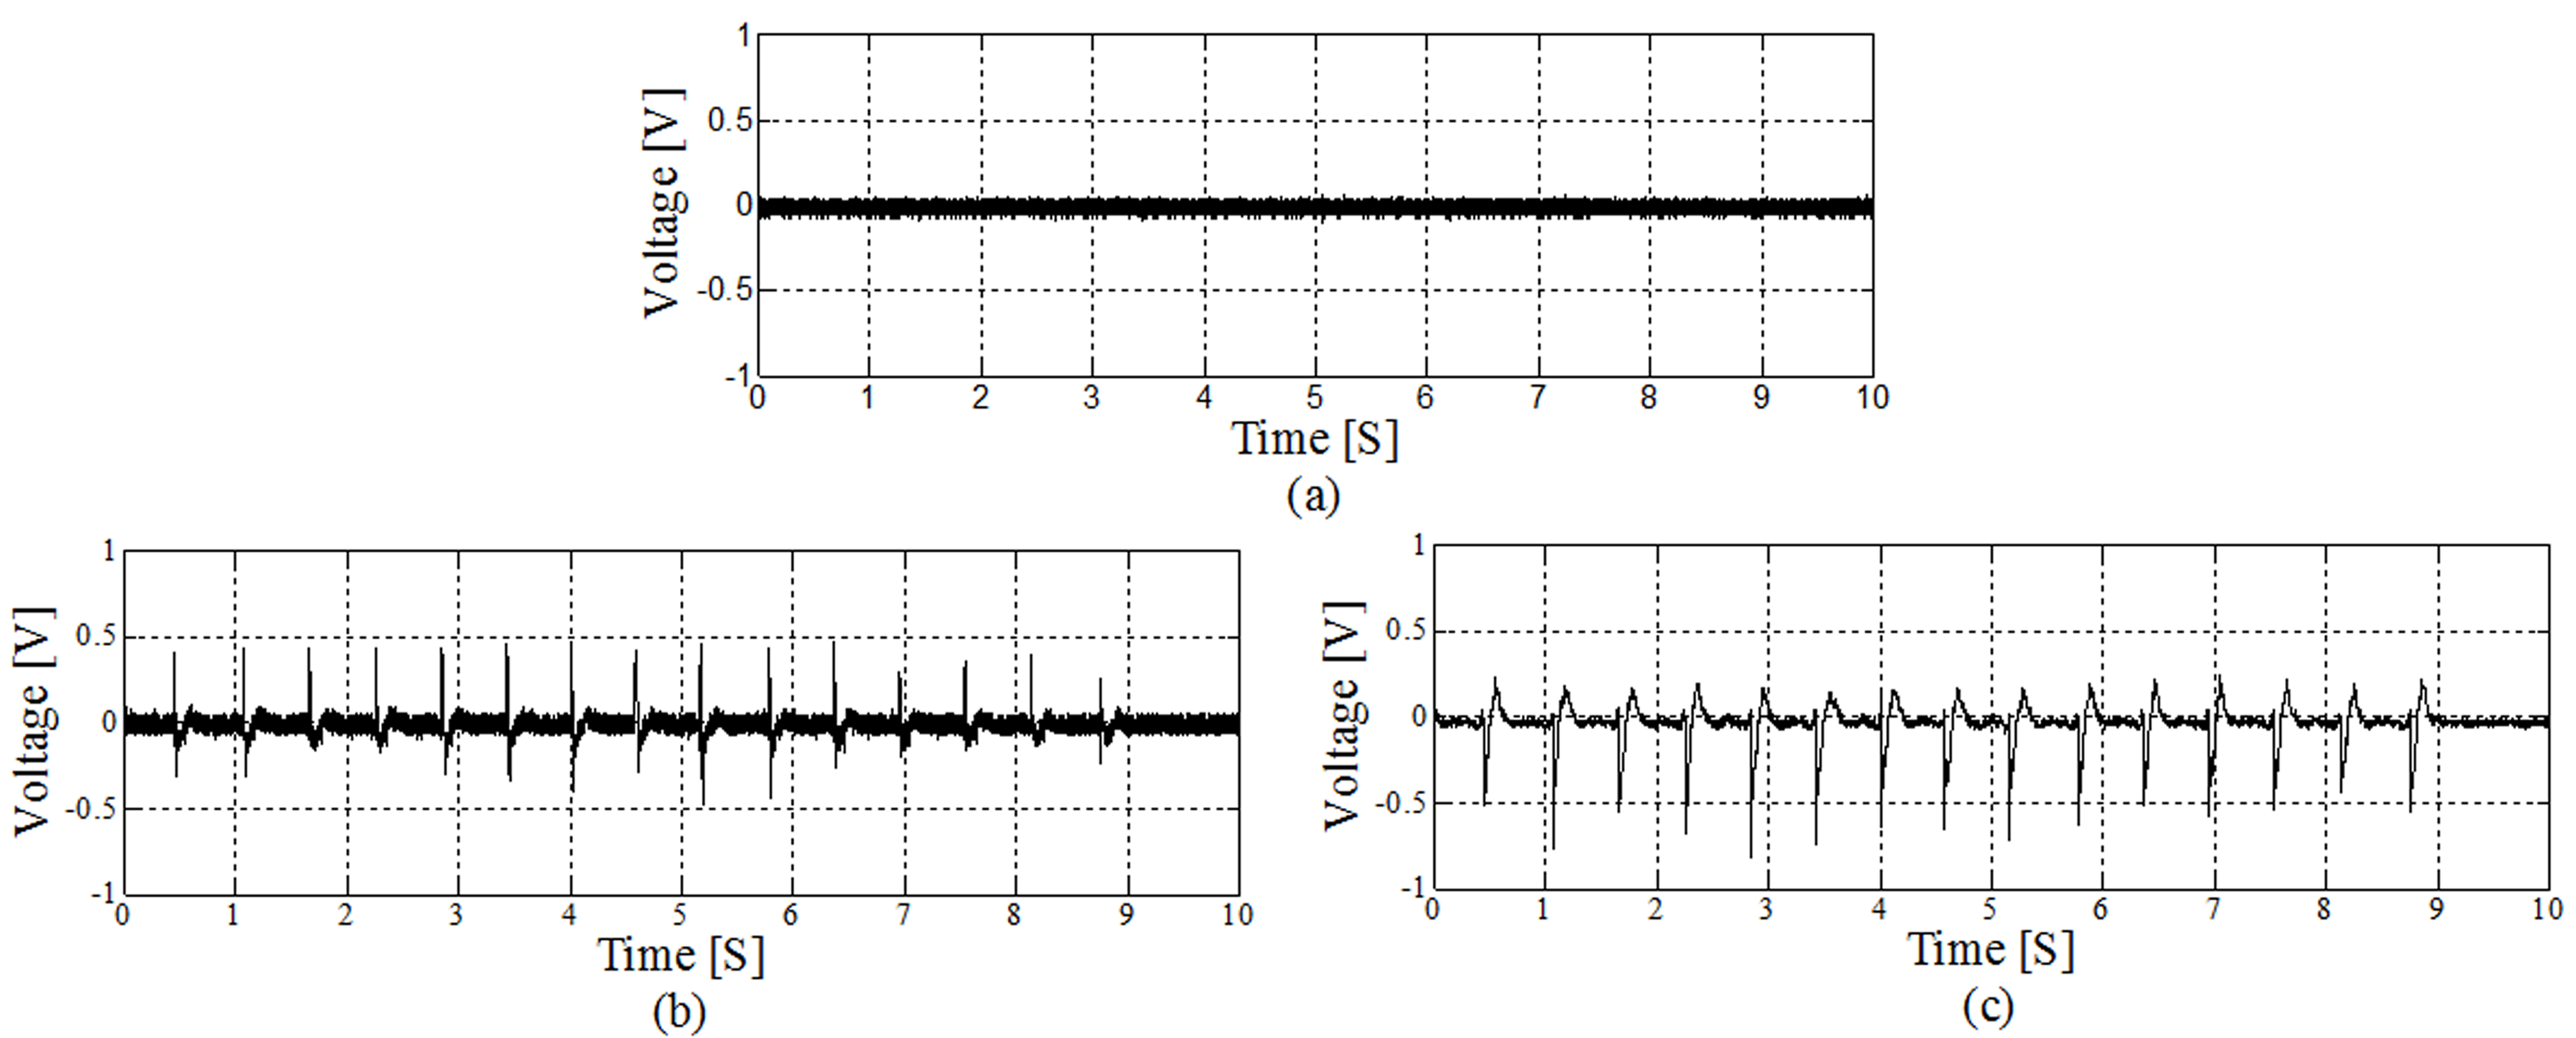 Acquired signals with (a) 1 kHz pure-tone at ECM, (b) 1 kHz pure- tone and mastication noise at ECM, and (c) mastication noise at piezo-electric sensor.